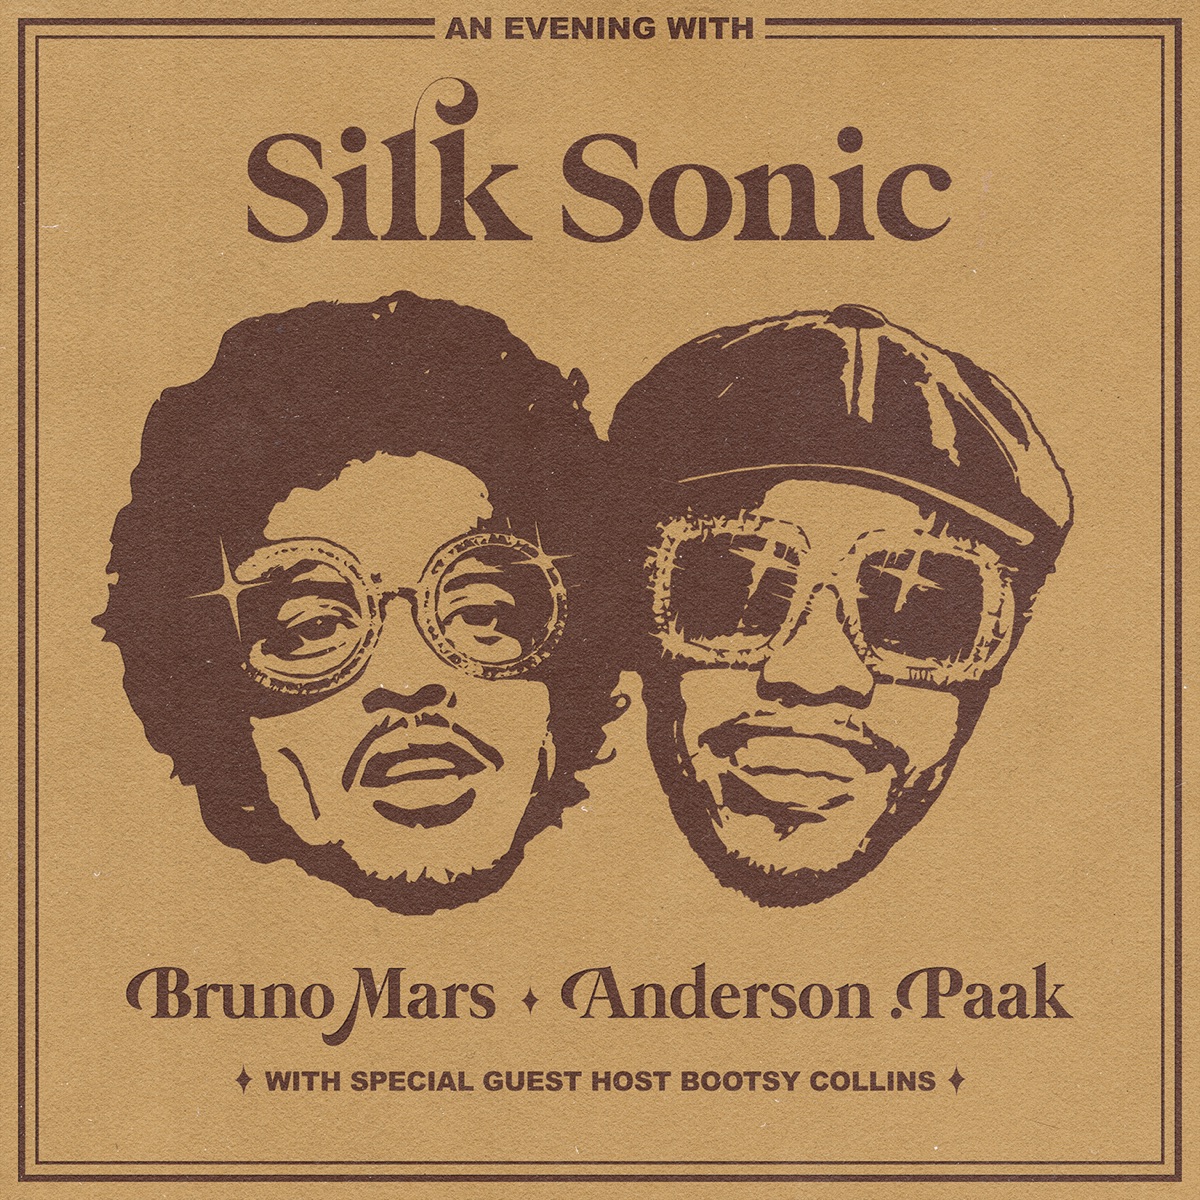 『Bruno Mars, Anderson .Paak, Silk Sonic - Fly As Me』収録の『An Evening With Silk Sonic 』ジャケット